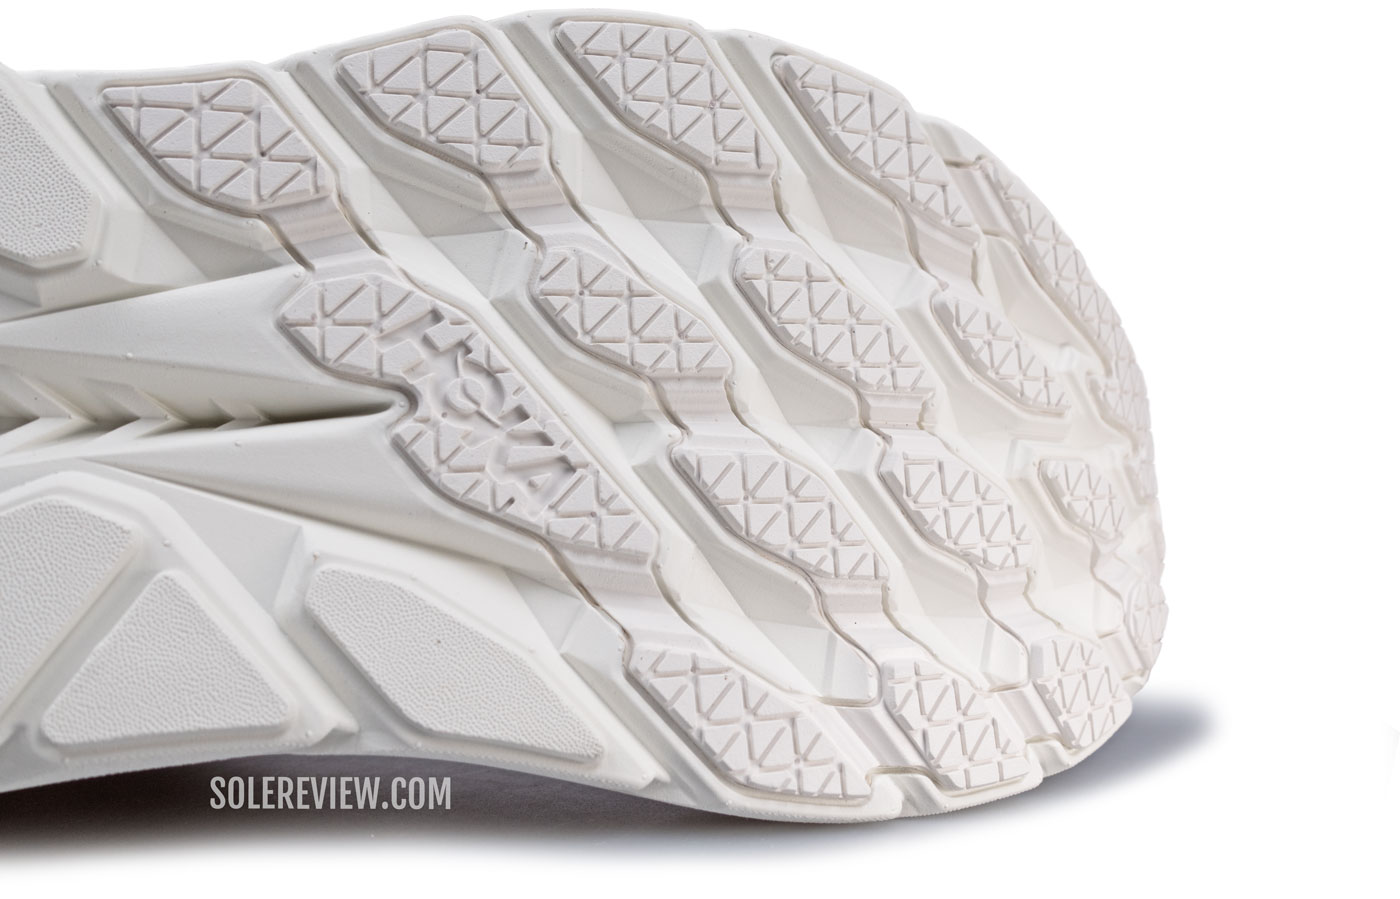 The forefoot outsole of the Hoka Clifton 8.